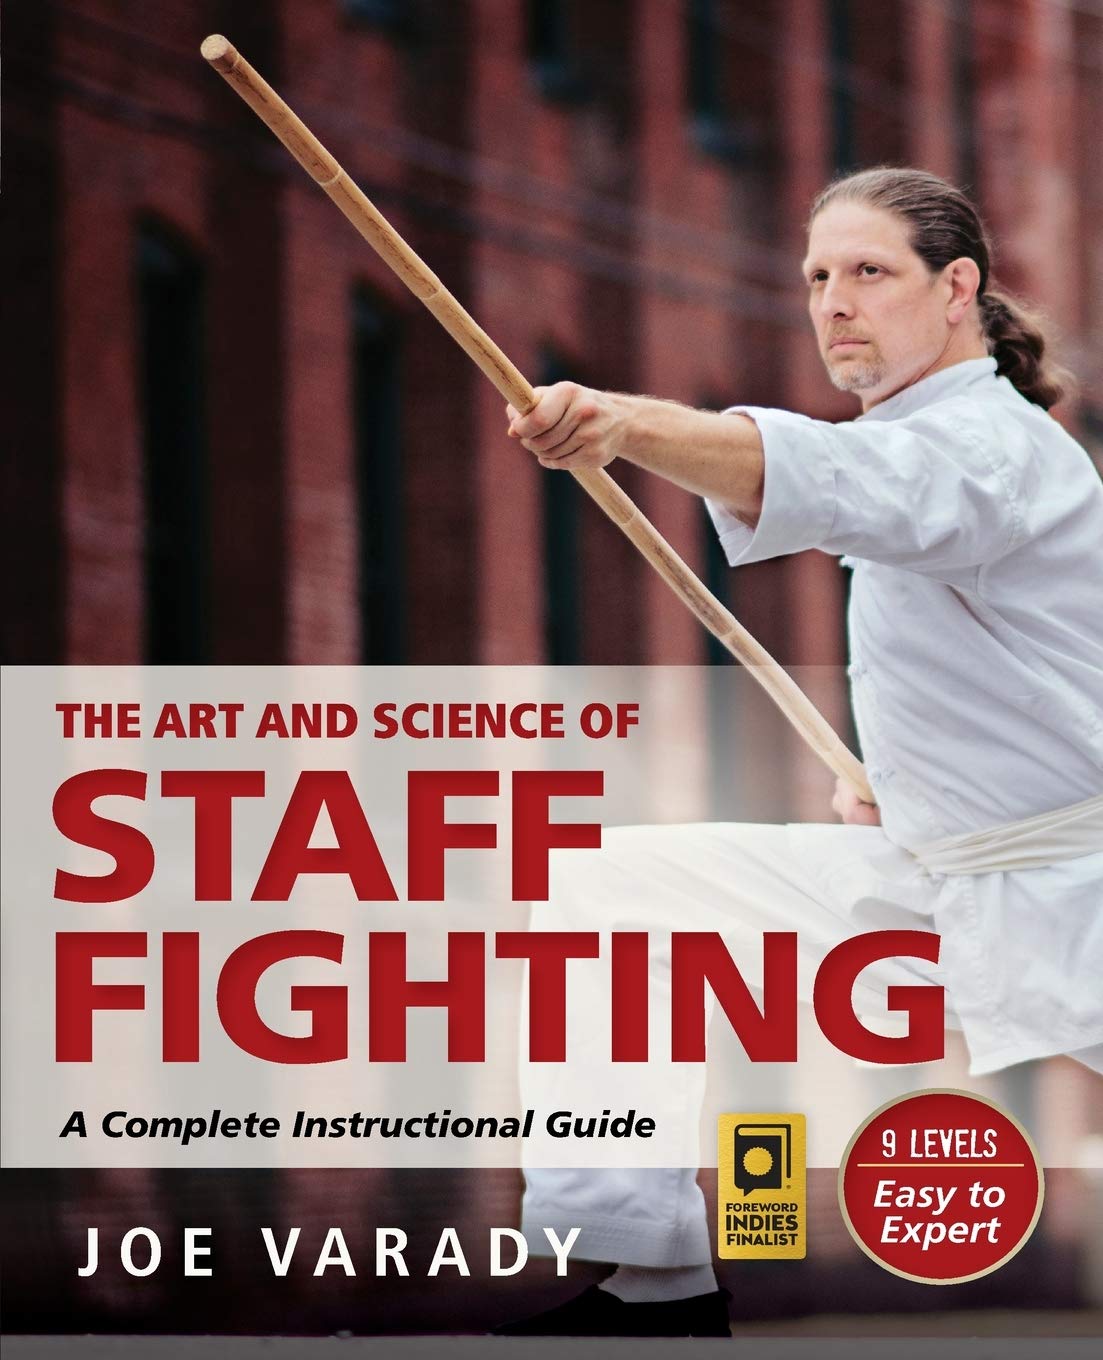 The Art and Science of Staff Fighting: A Complete Instructional Guide Book by Joe Varady - Budovideos Inc